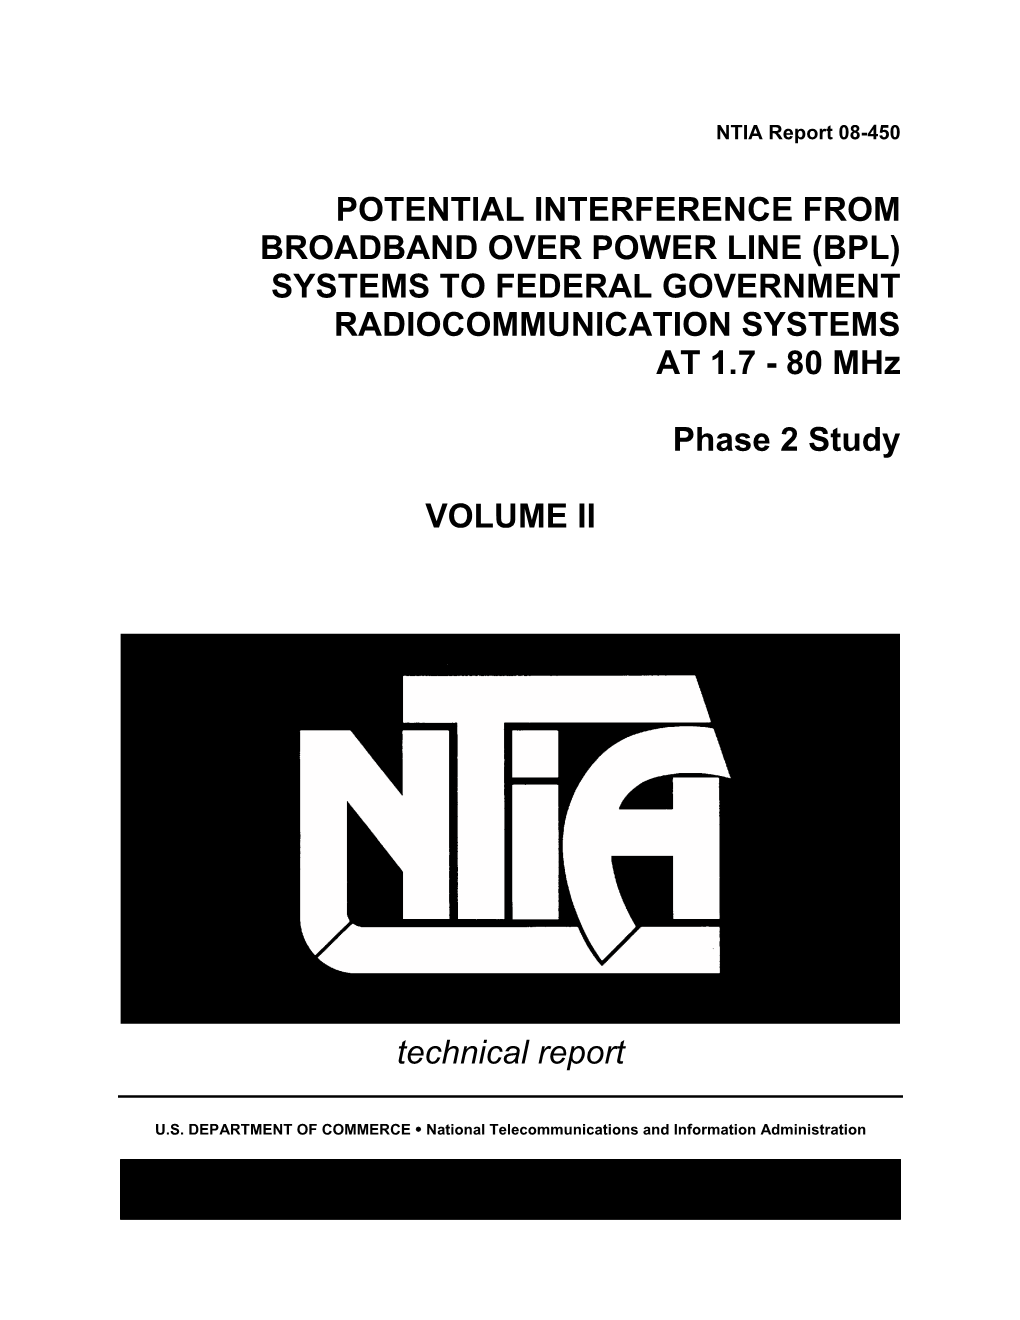 BPL) SYSTEMS to FEDERAL GOVERNMENT RADIOCOMMUNICATION SYSTEMS at 1.7 - 80 Mhz